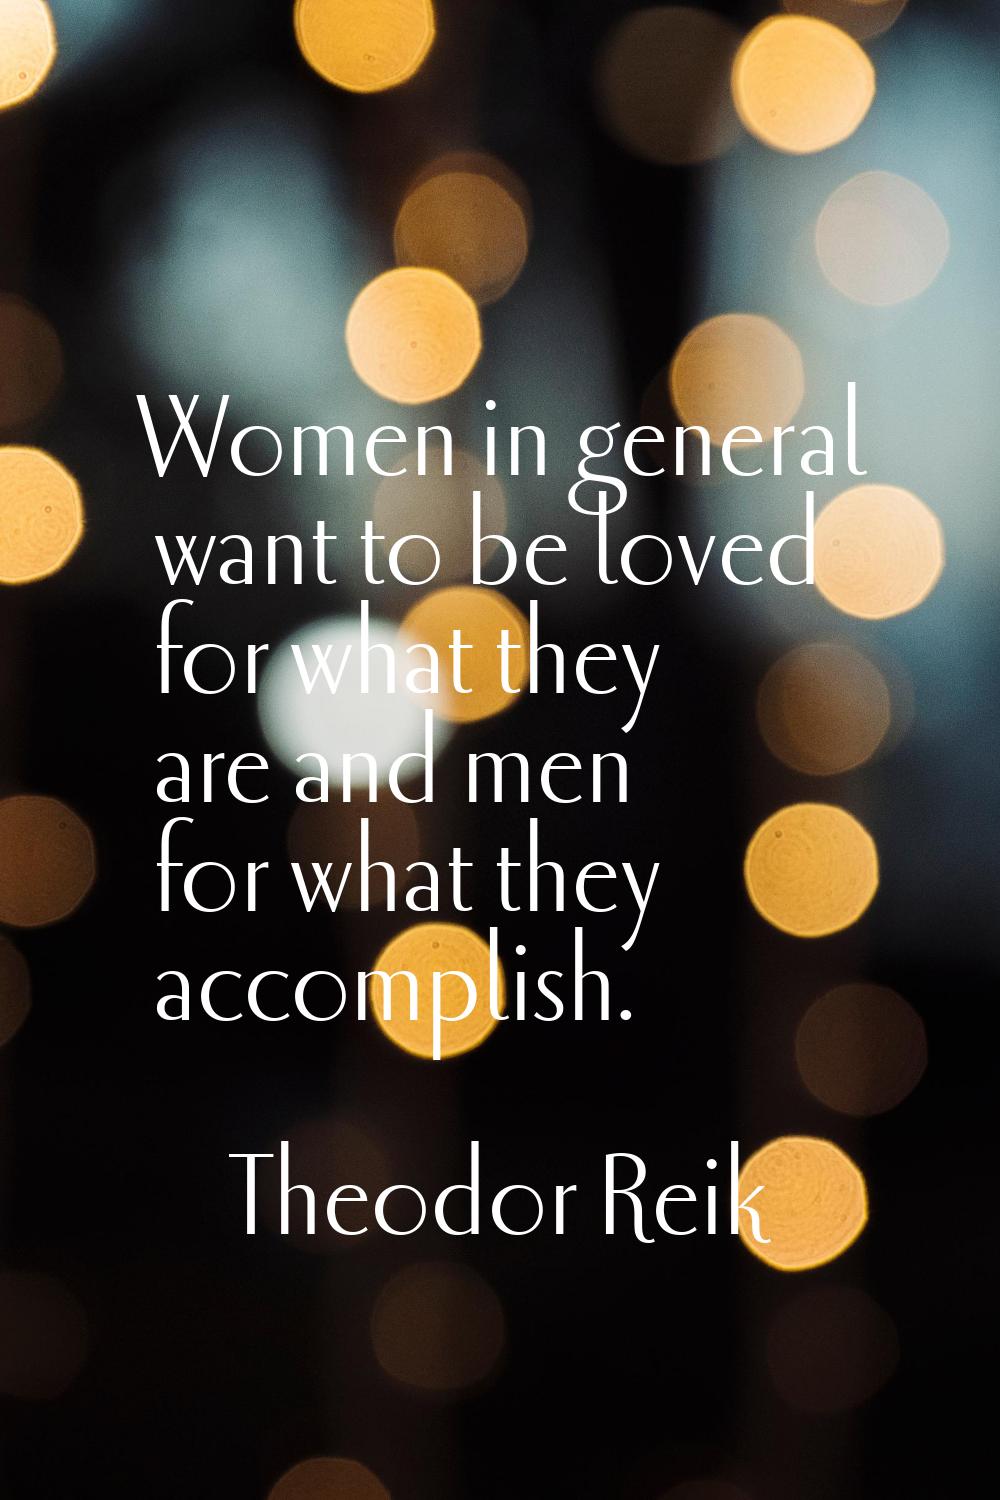 Women in general want to be loved for what they are and men for what they accomplish.